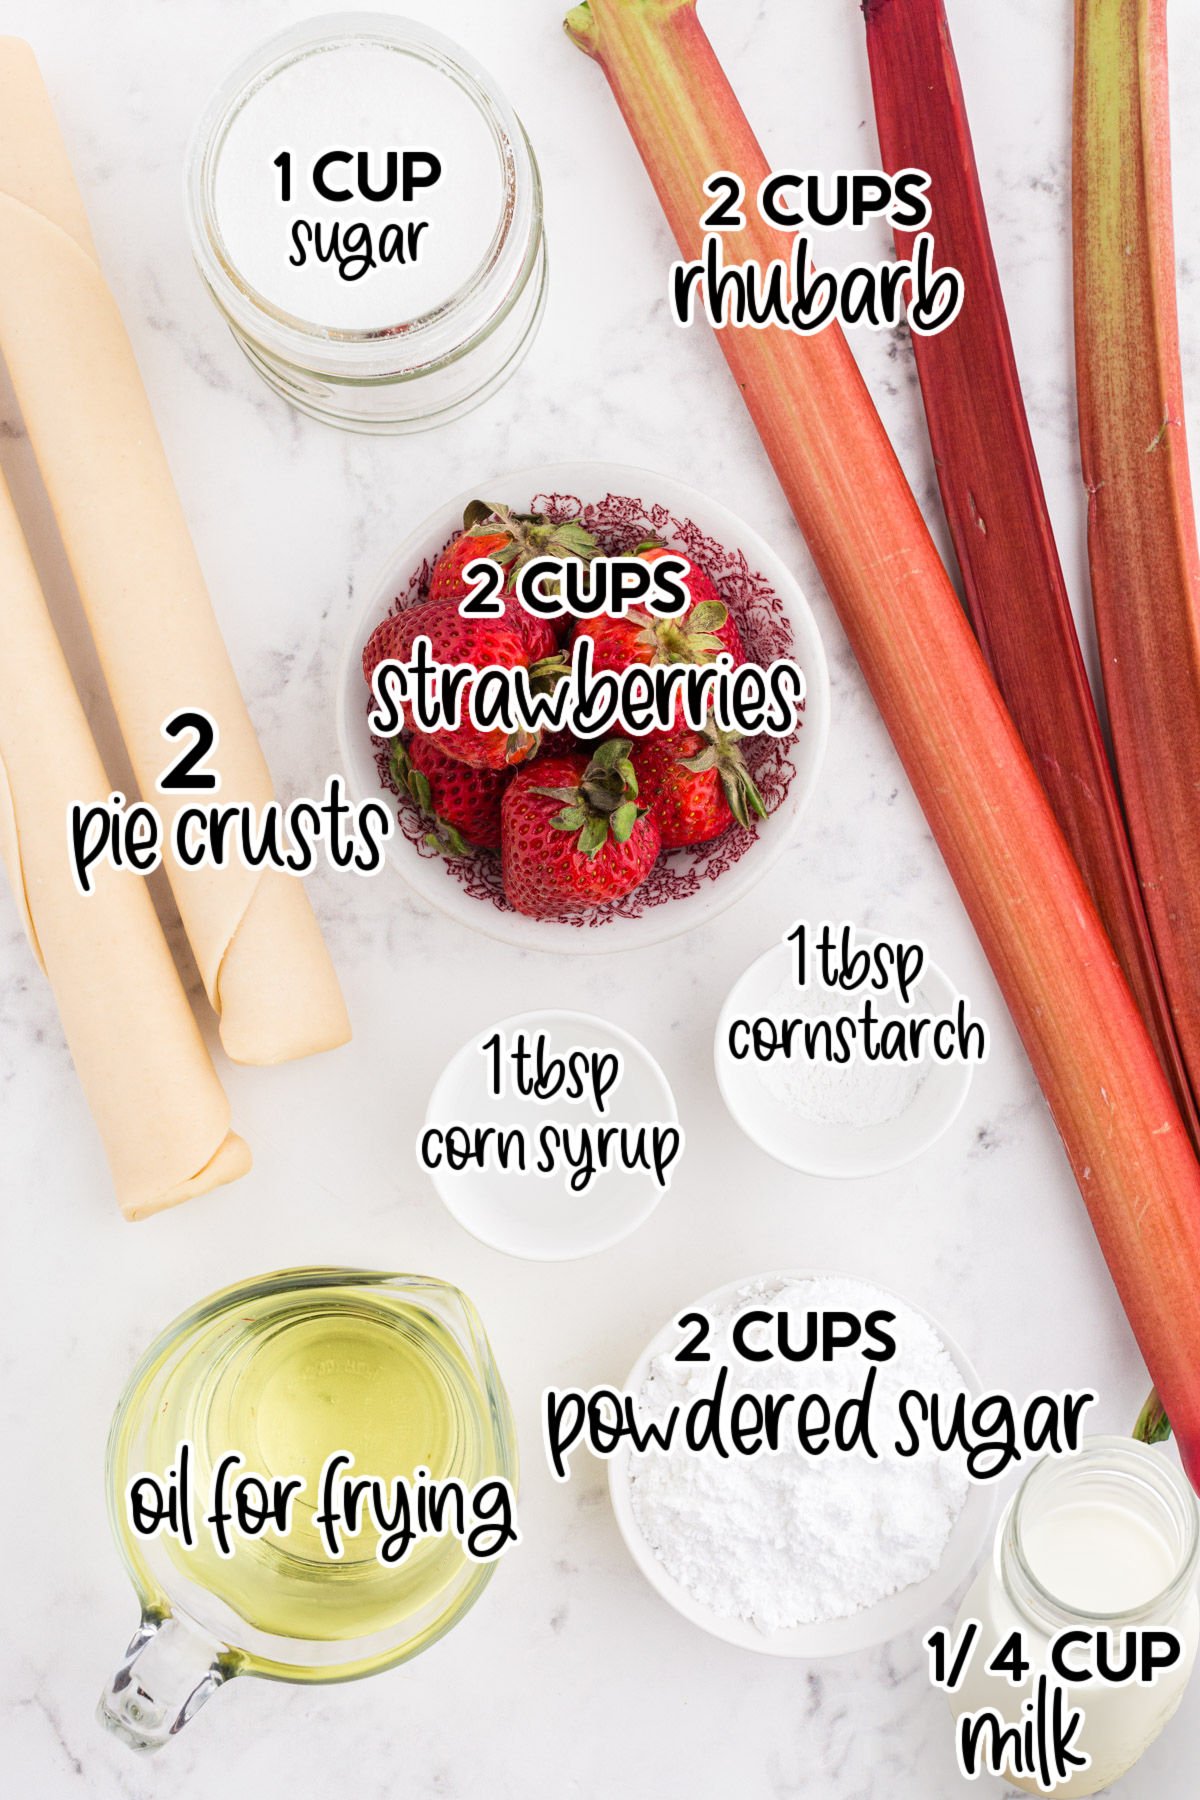 Individual ingredients for the strawberry rhubarb hand pies, with text labels and amounts.